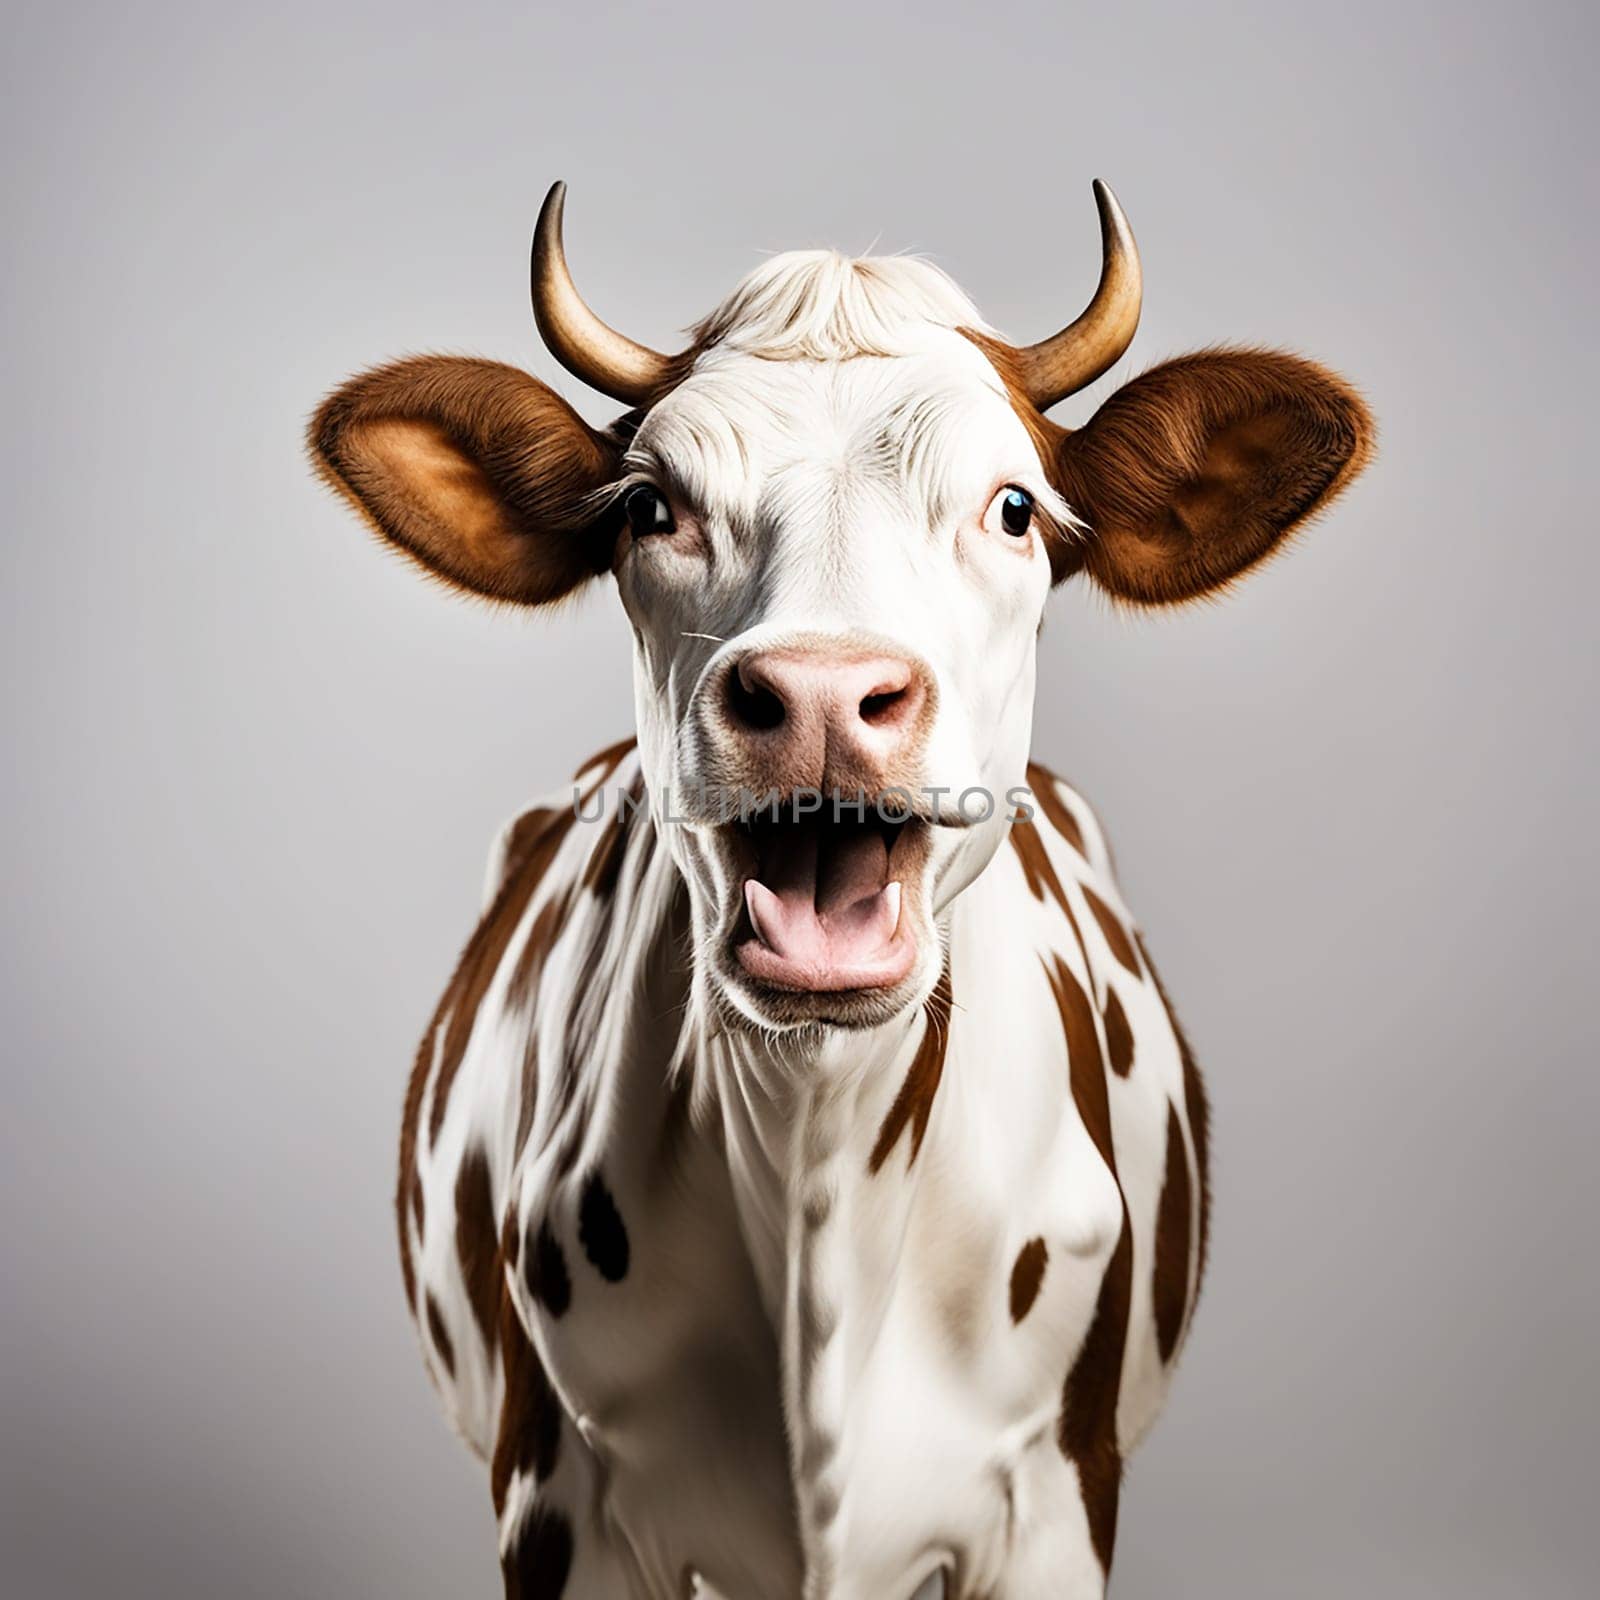 Amusing Portrait cow Isolated on White Background by Petrichor